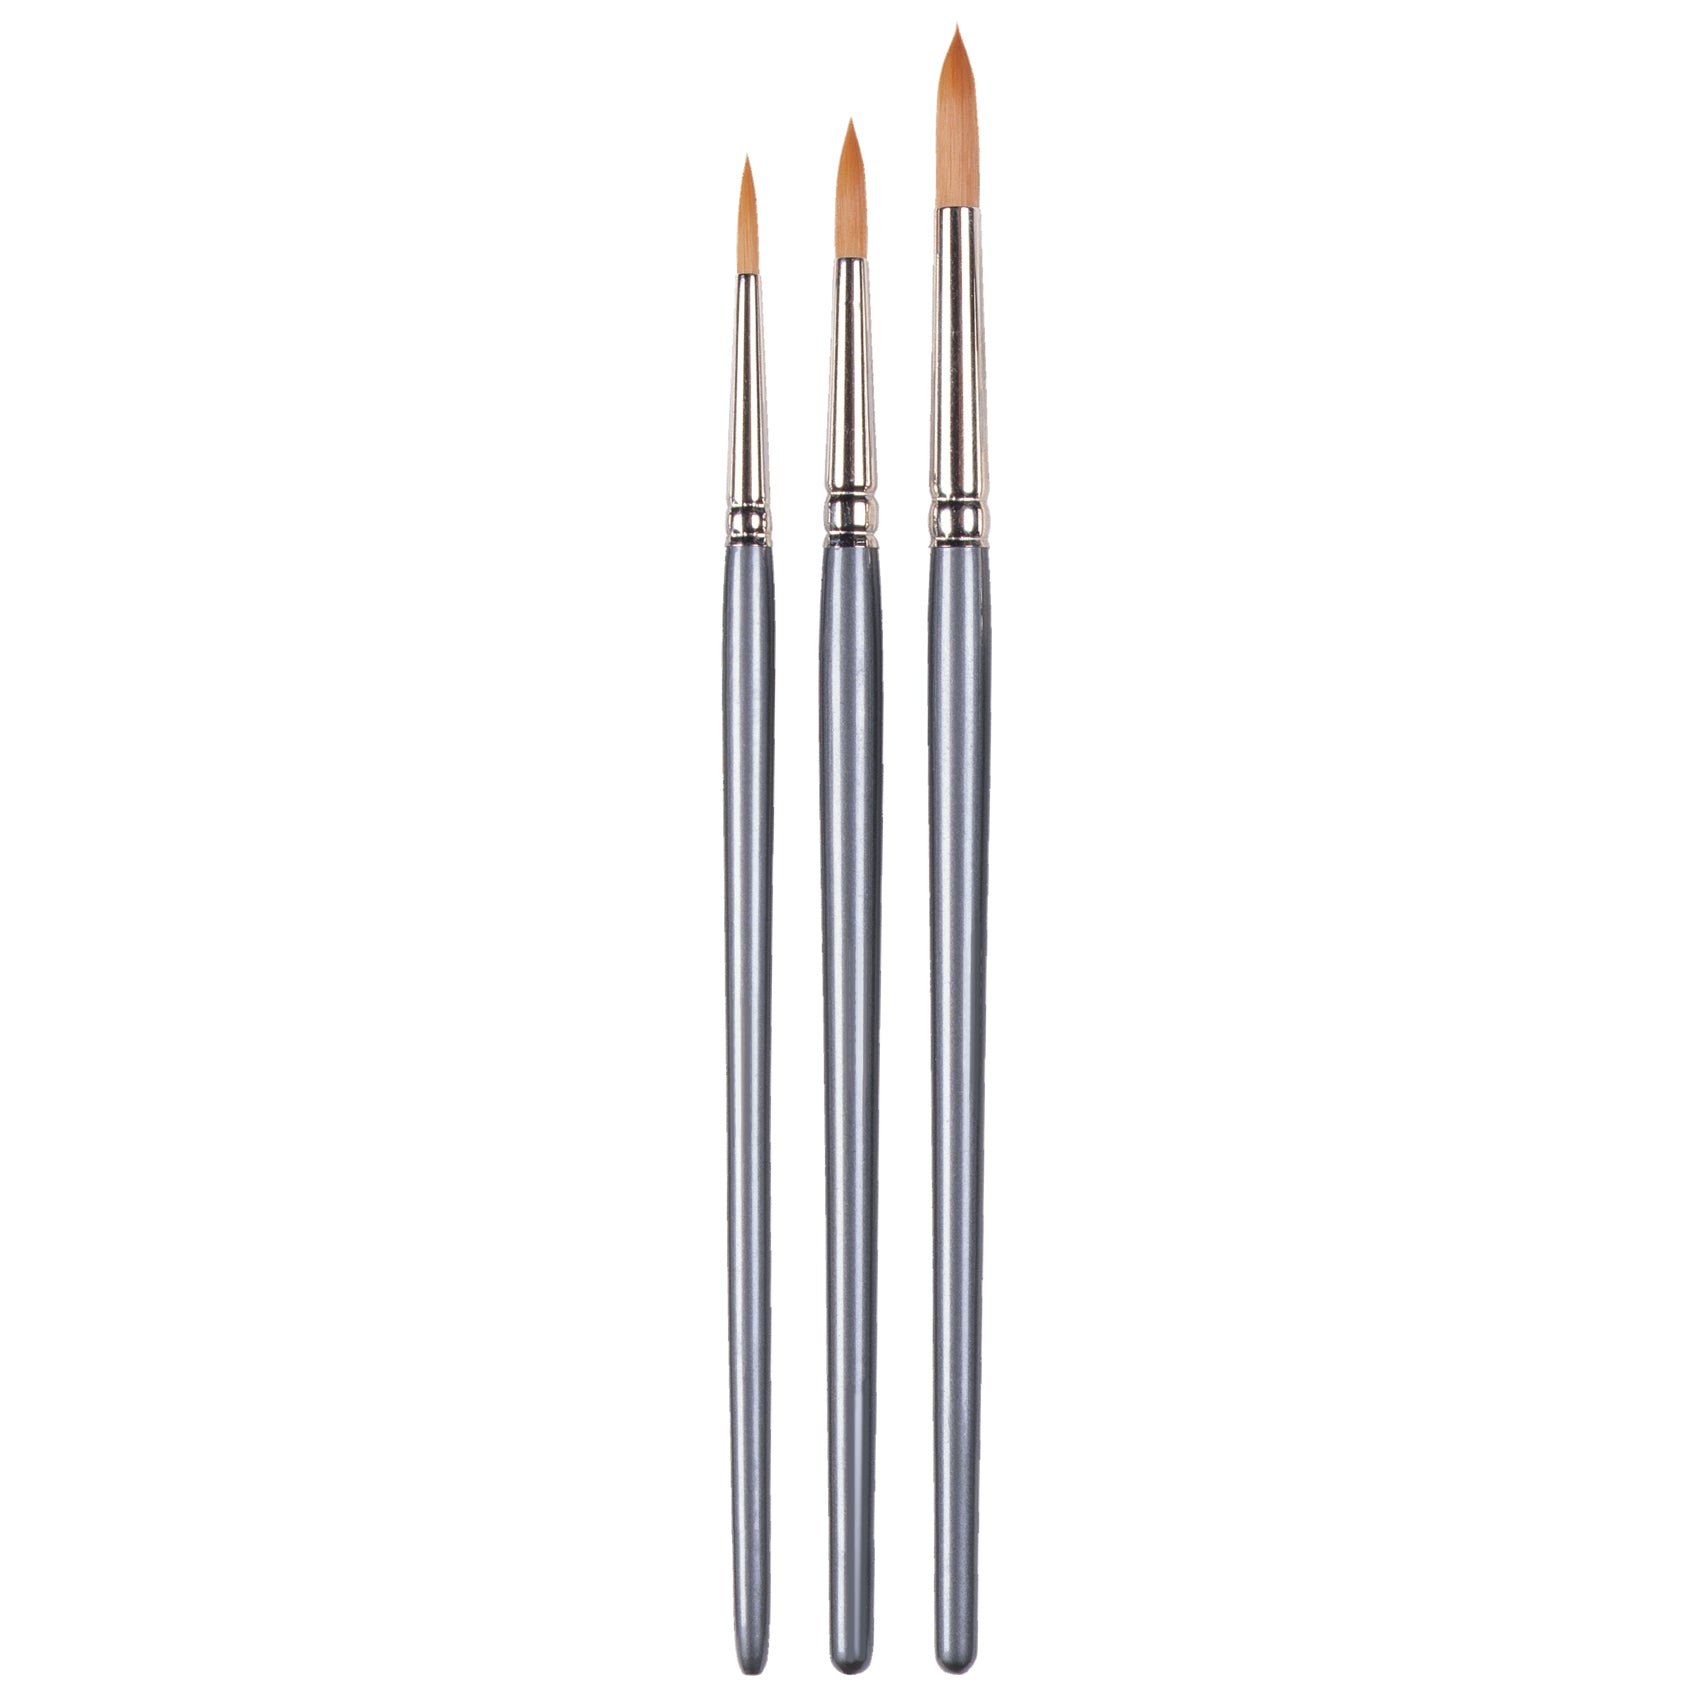 Pro Arte's Masterstroke Series 60 Prolon brushes are a great, versatile and economical range.  Ideal for students and beginners, as well as for crafts such as glass painting, ceramics and model painting. 